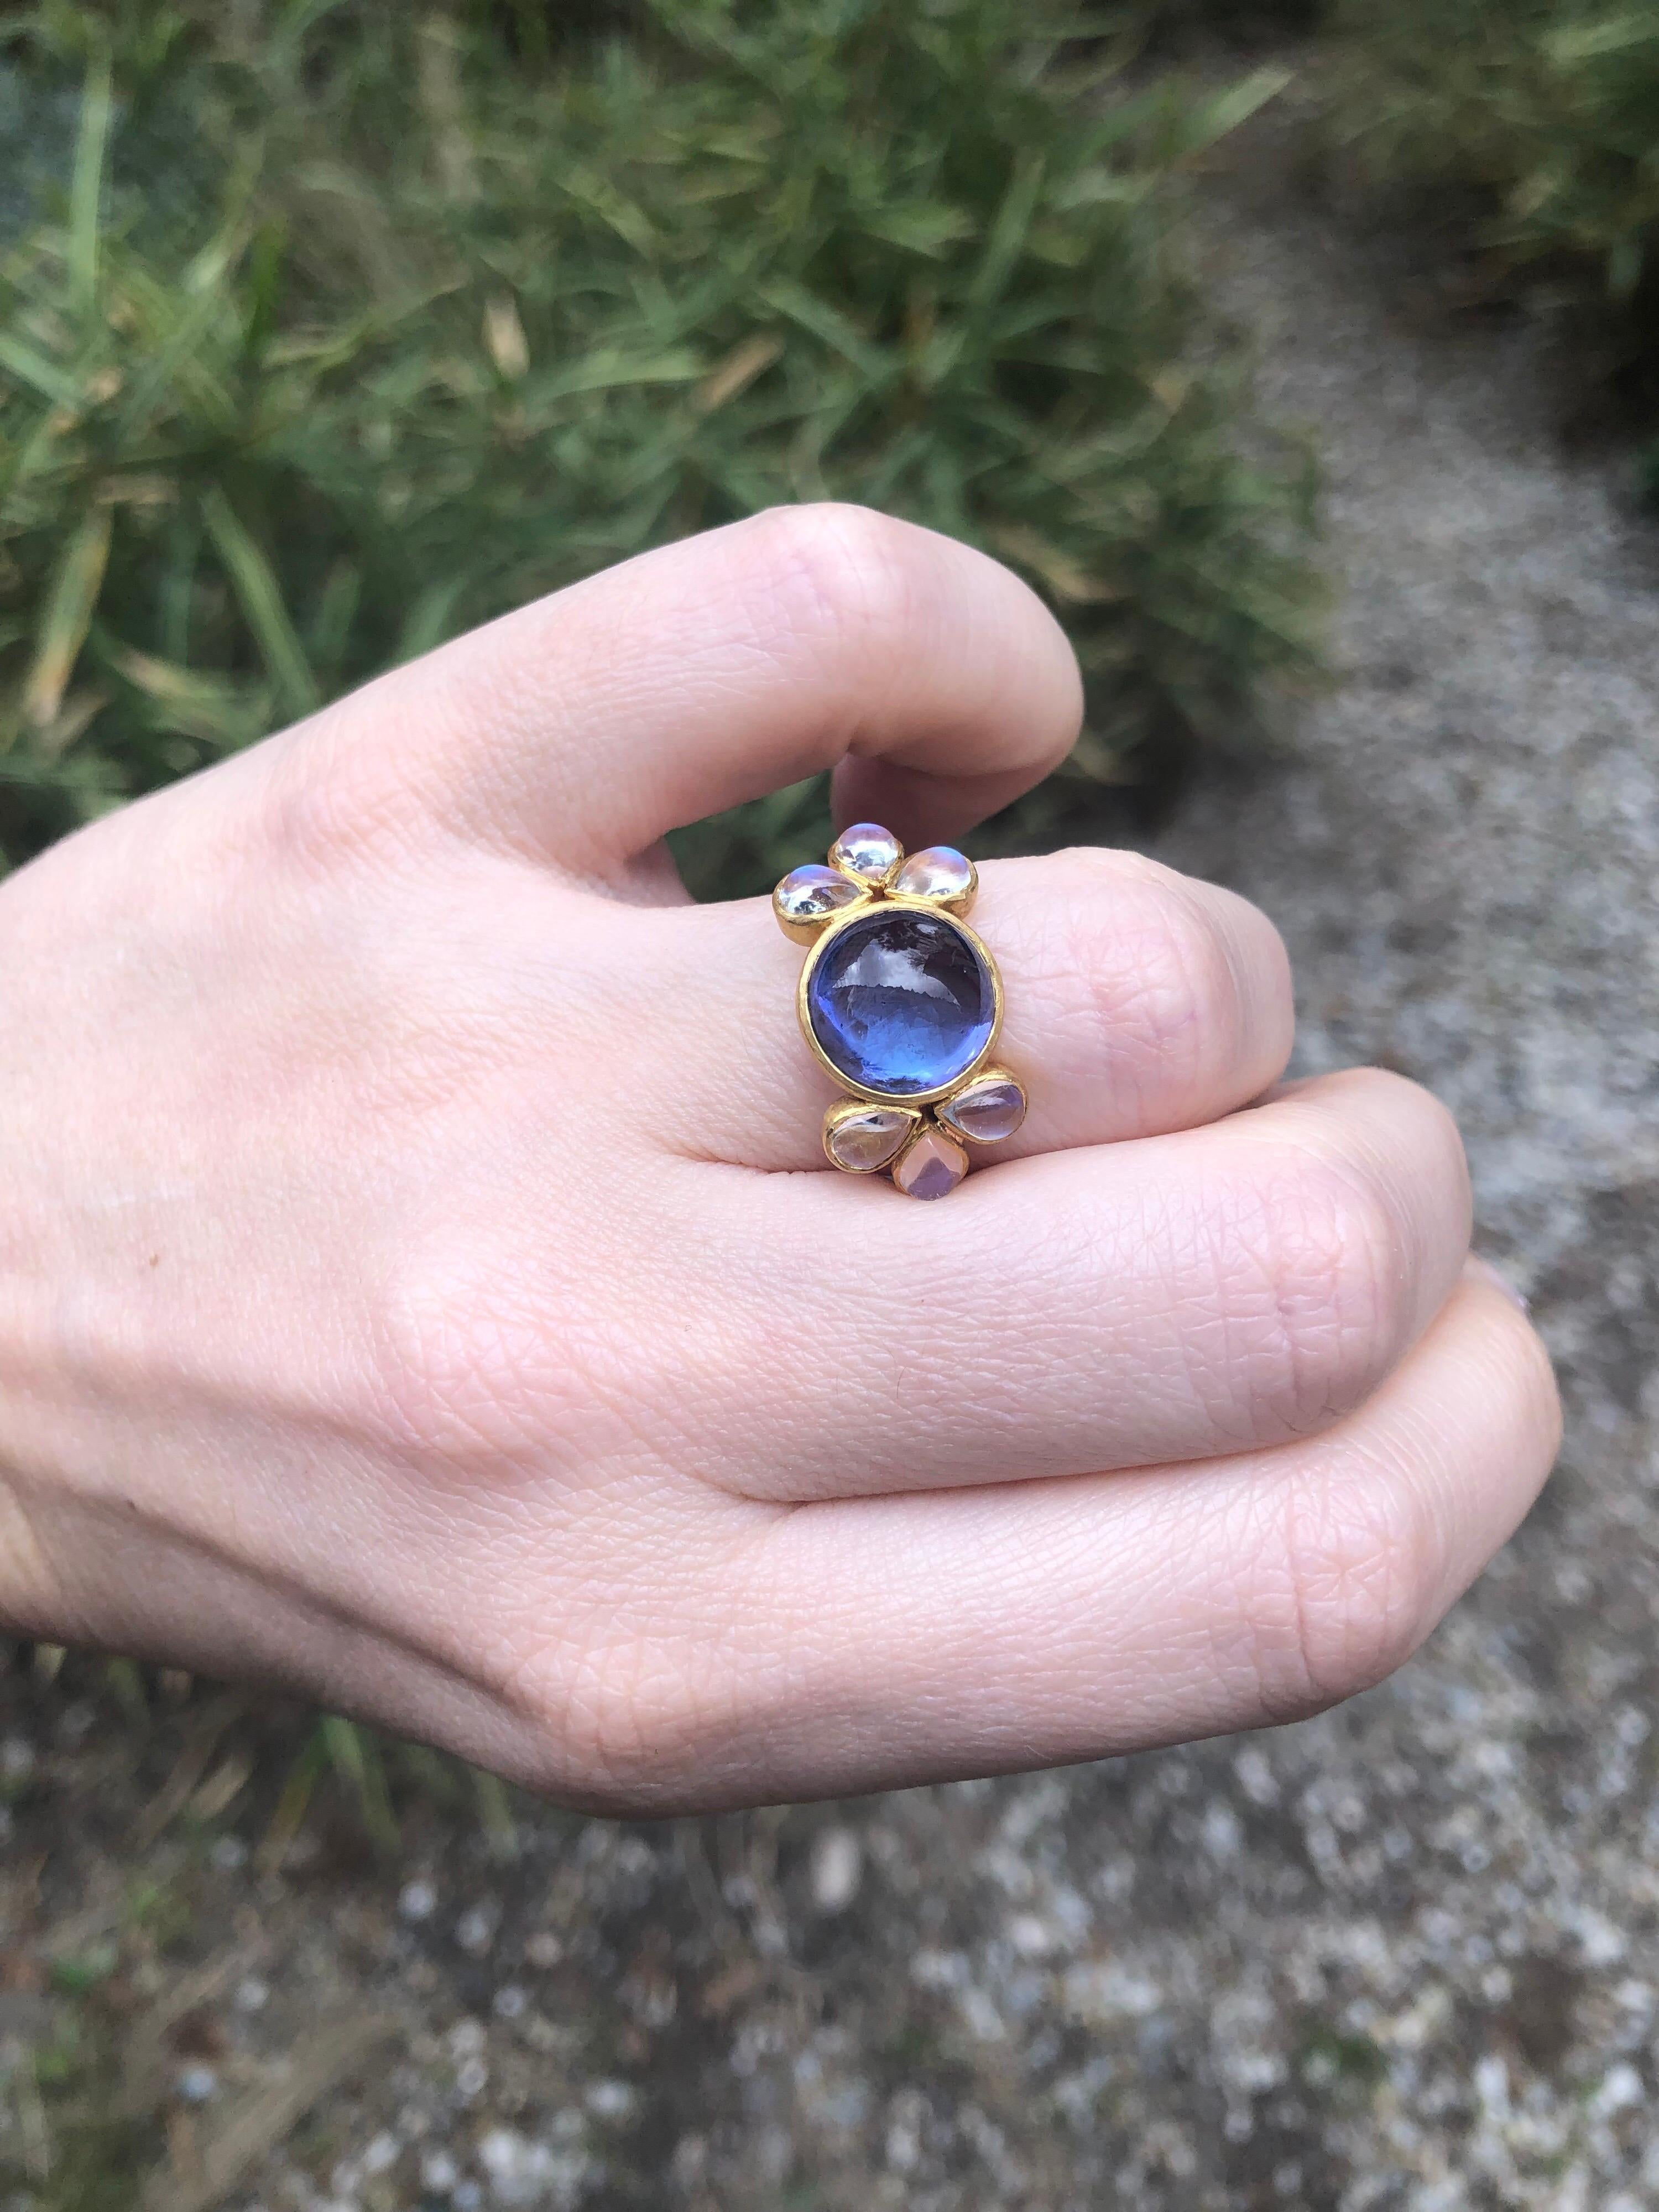 This delicate ring is composed of an intense tanzanite cabochon of 6.95 cts surrounded by 6 moonstones cabochons (total weight: 2.07cts). The tanzanite is natural with typical eye visible inclusions. Its colour is blue with a very slightly purple